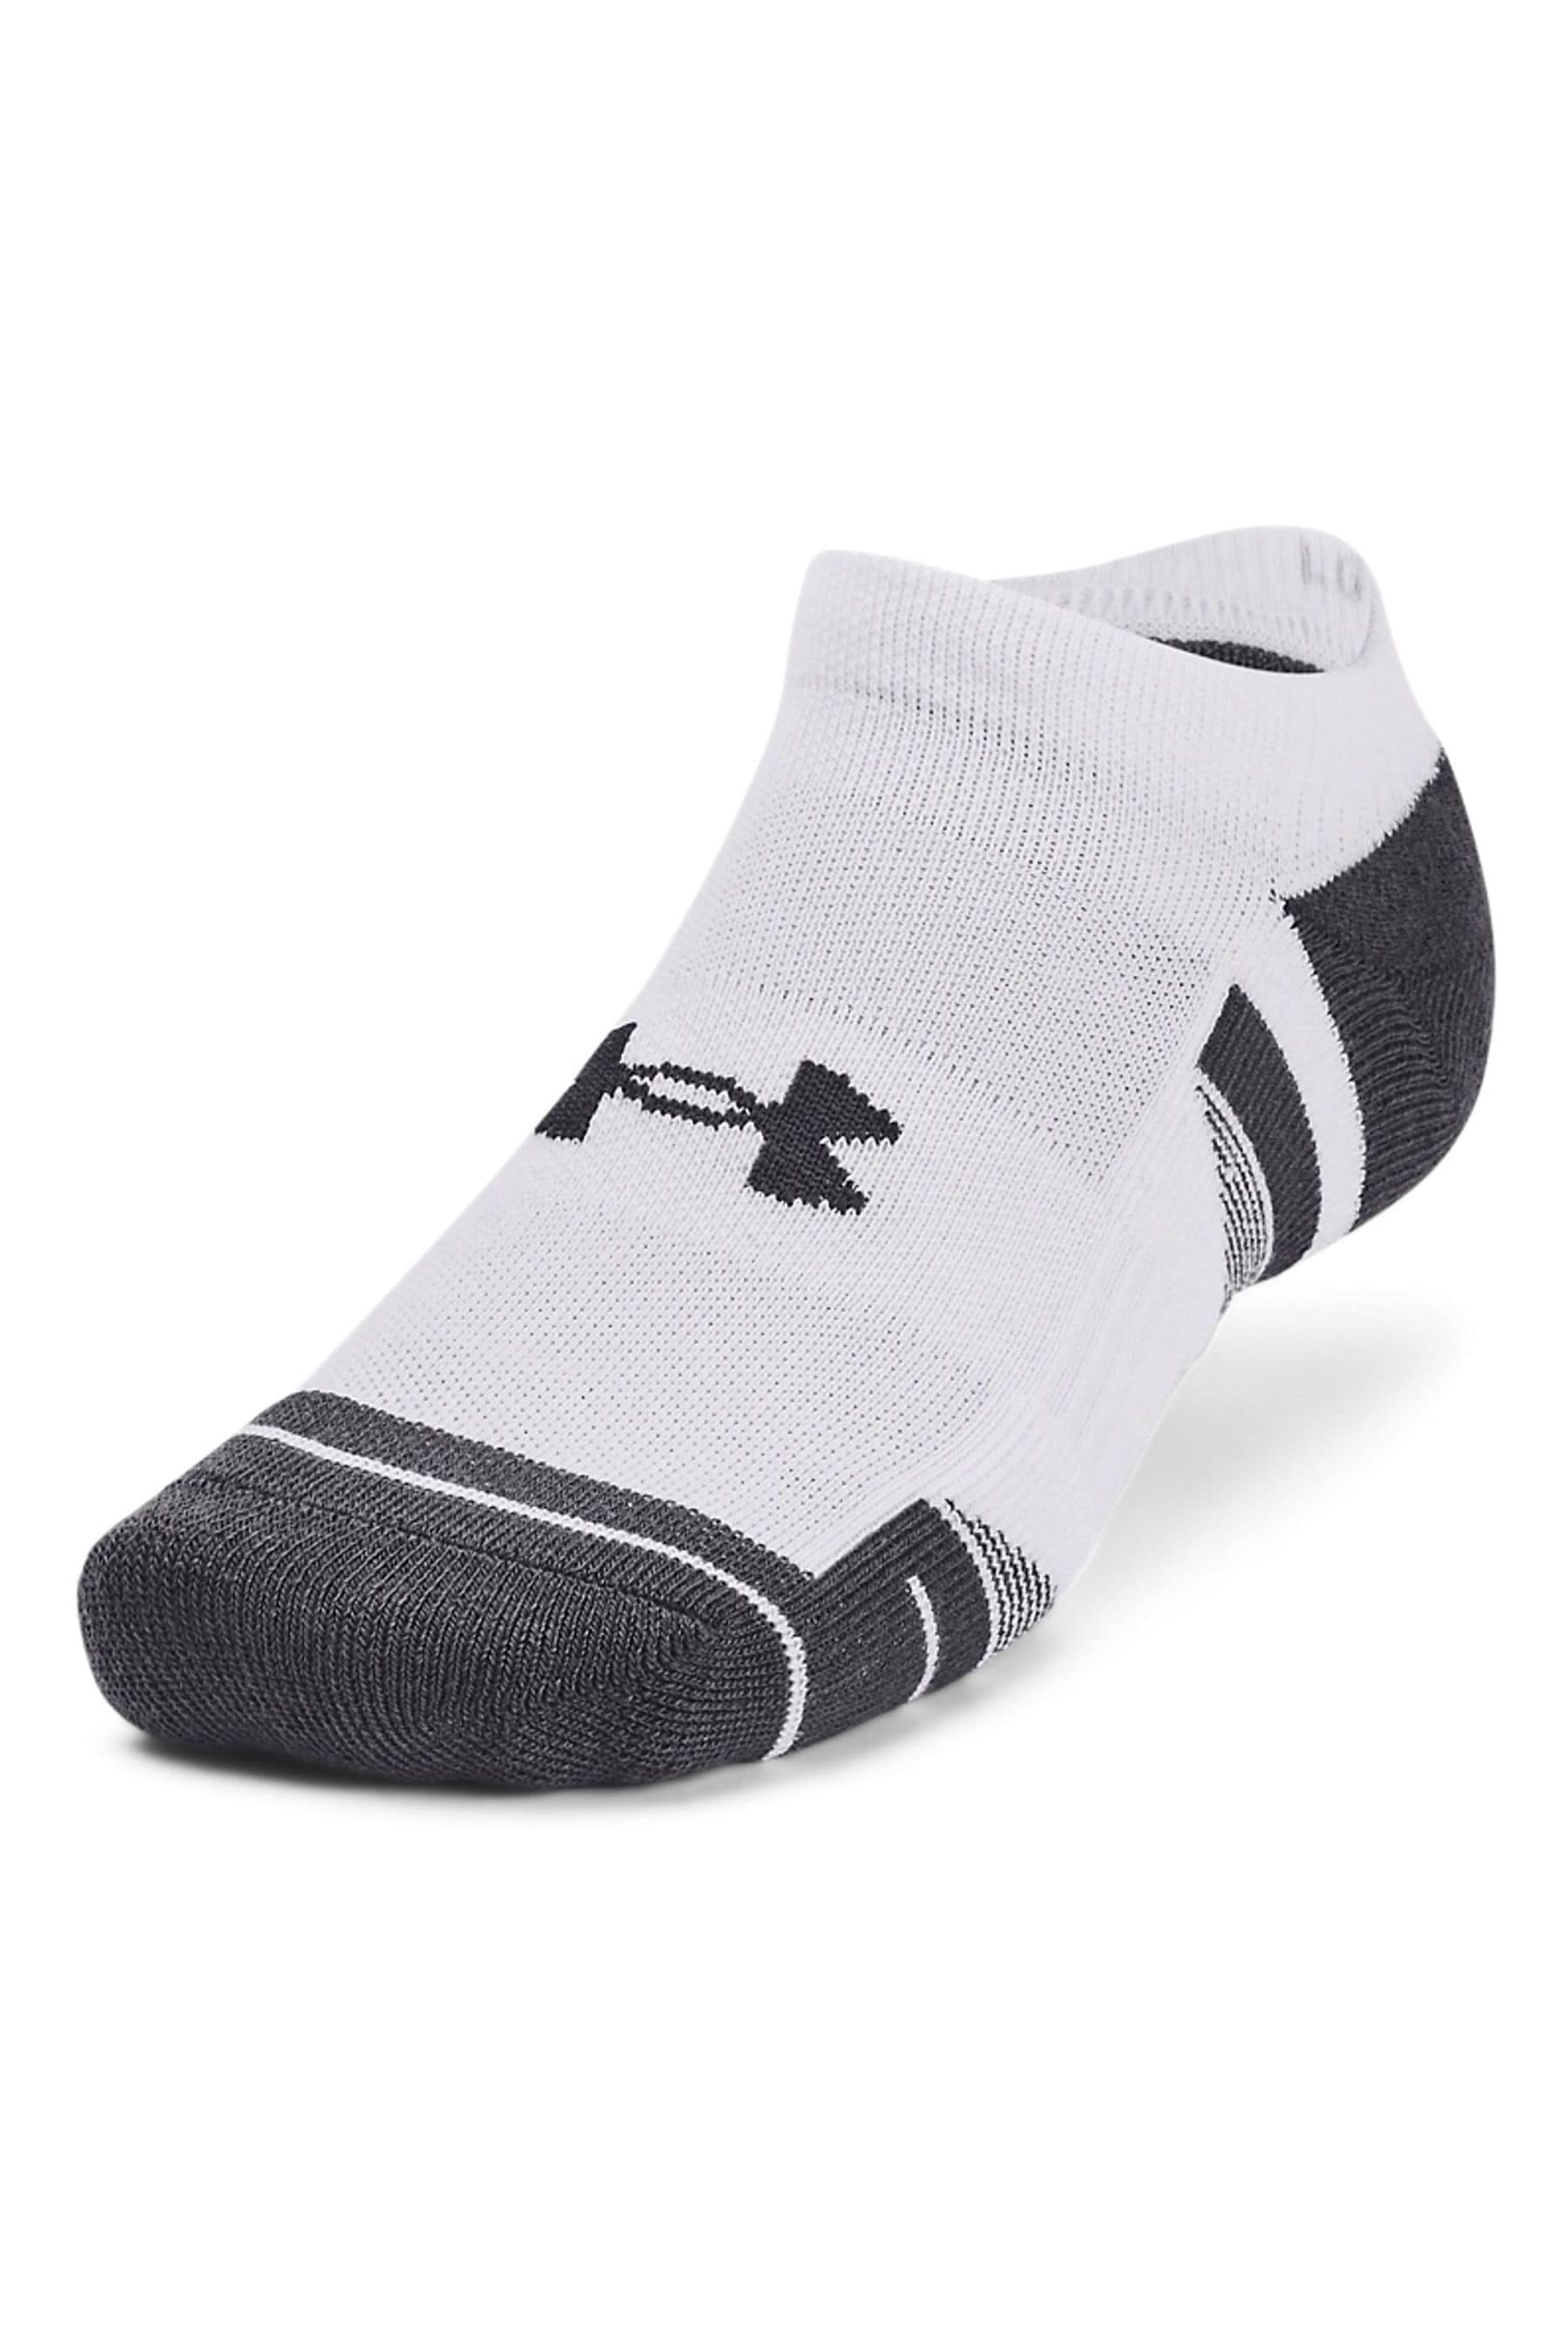 Buy Under Armour Performance Tech Socks 3 Pack from the Next UK online shop